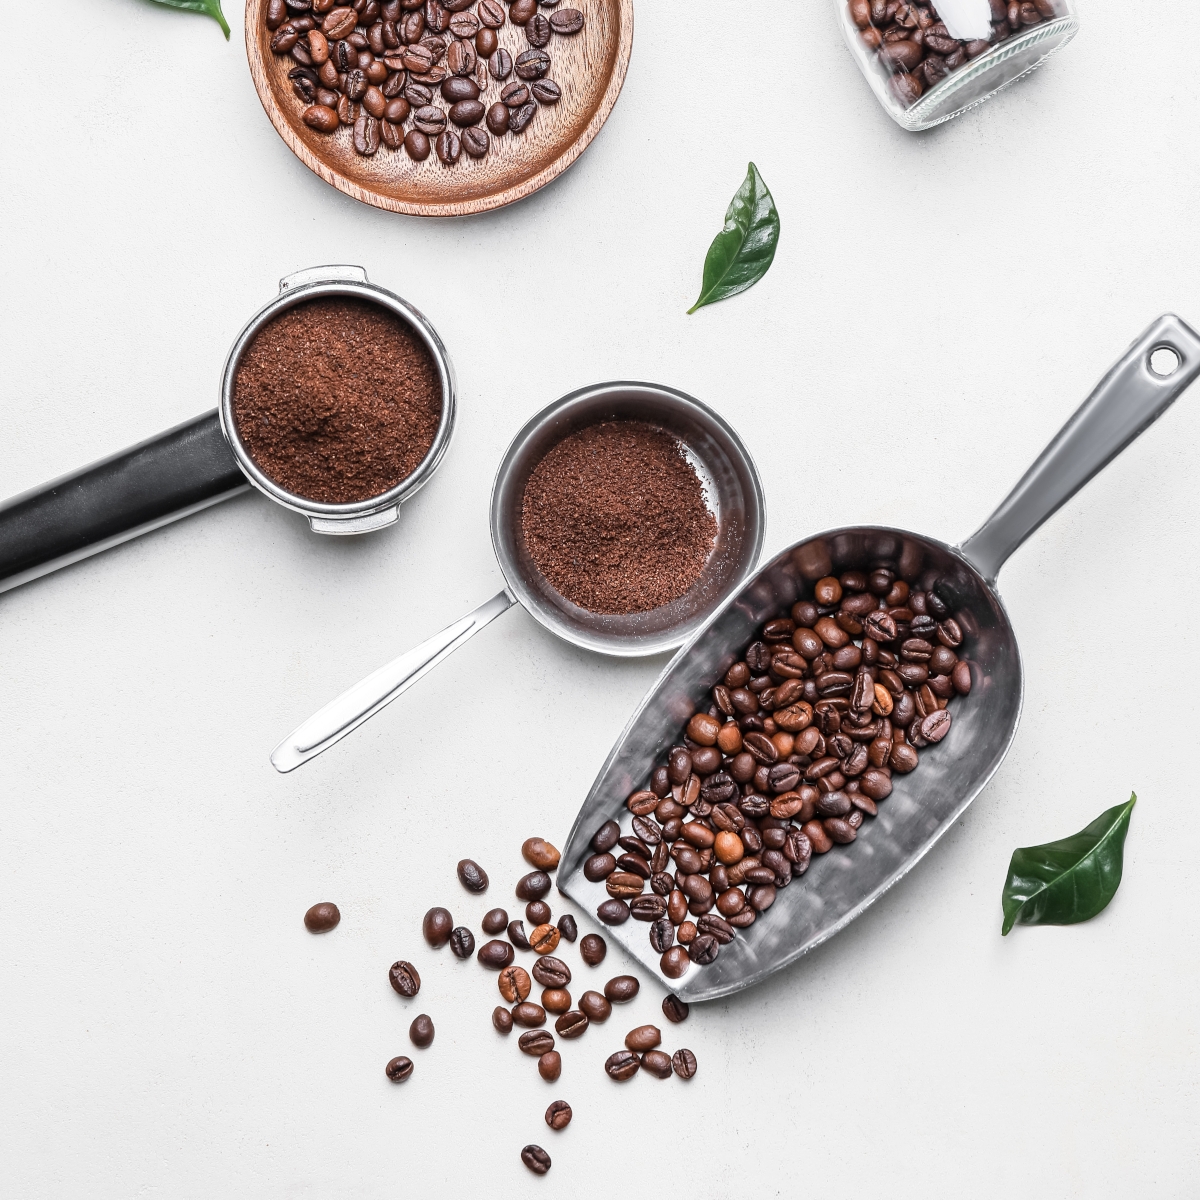 scoops of coffee and beans